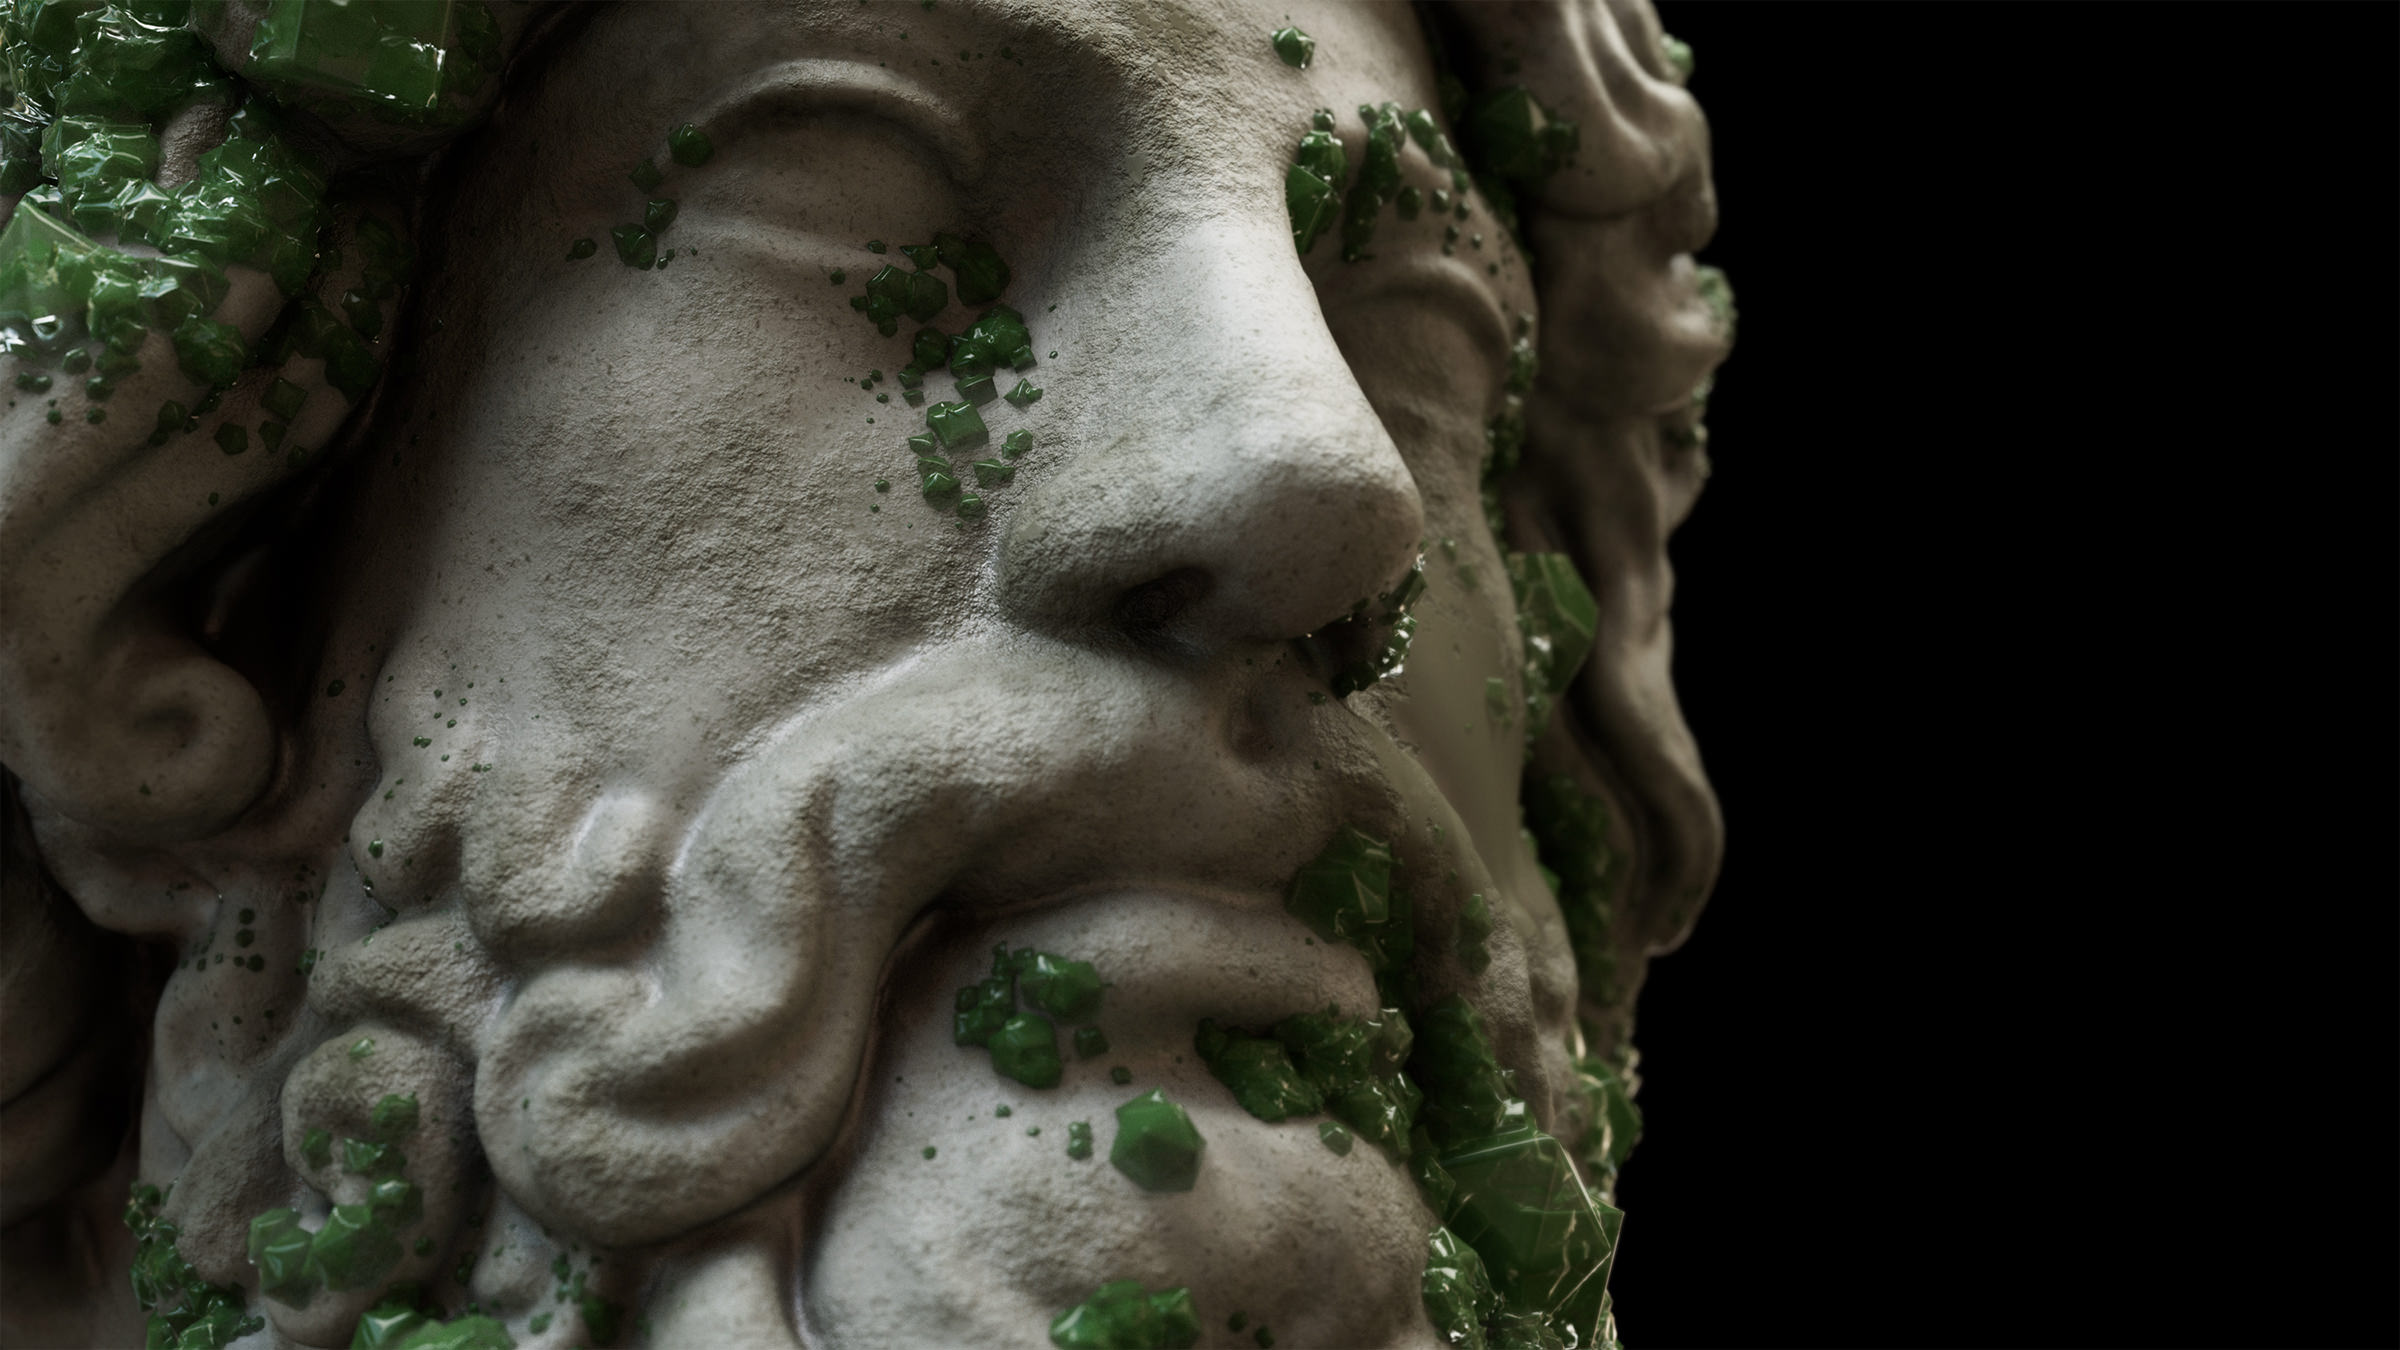 A stone sculpture of an ancient Greek man’s face covered in shiny green gem-like mold